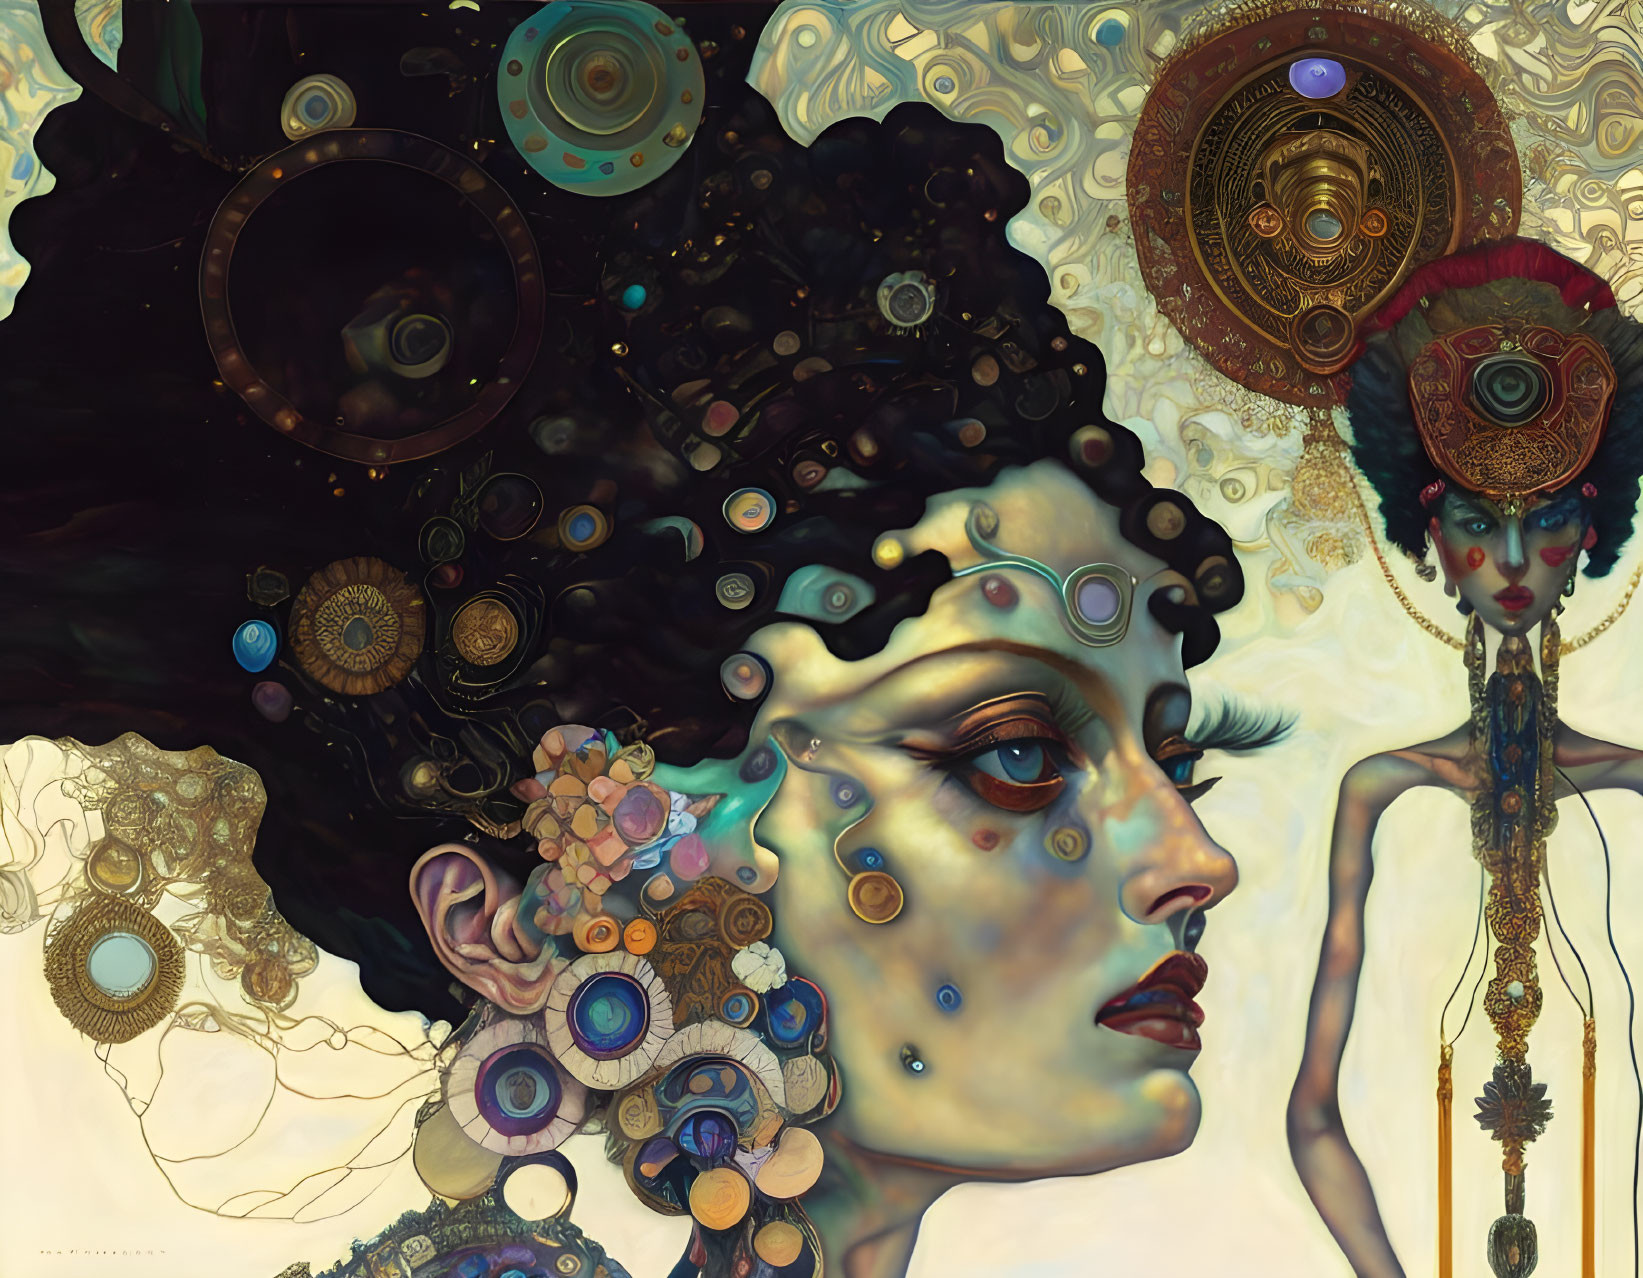 Detailed Artwork of Two Female Figures with Mechanical and Organic Elements